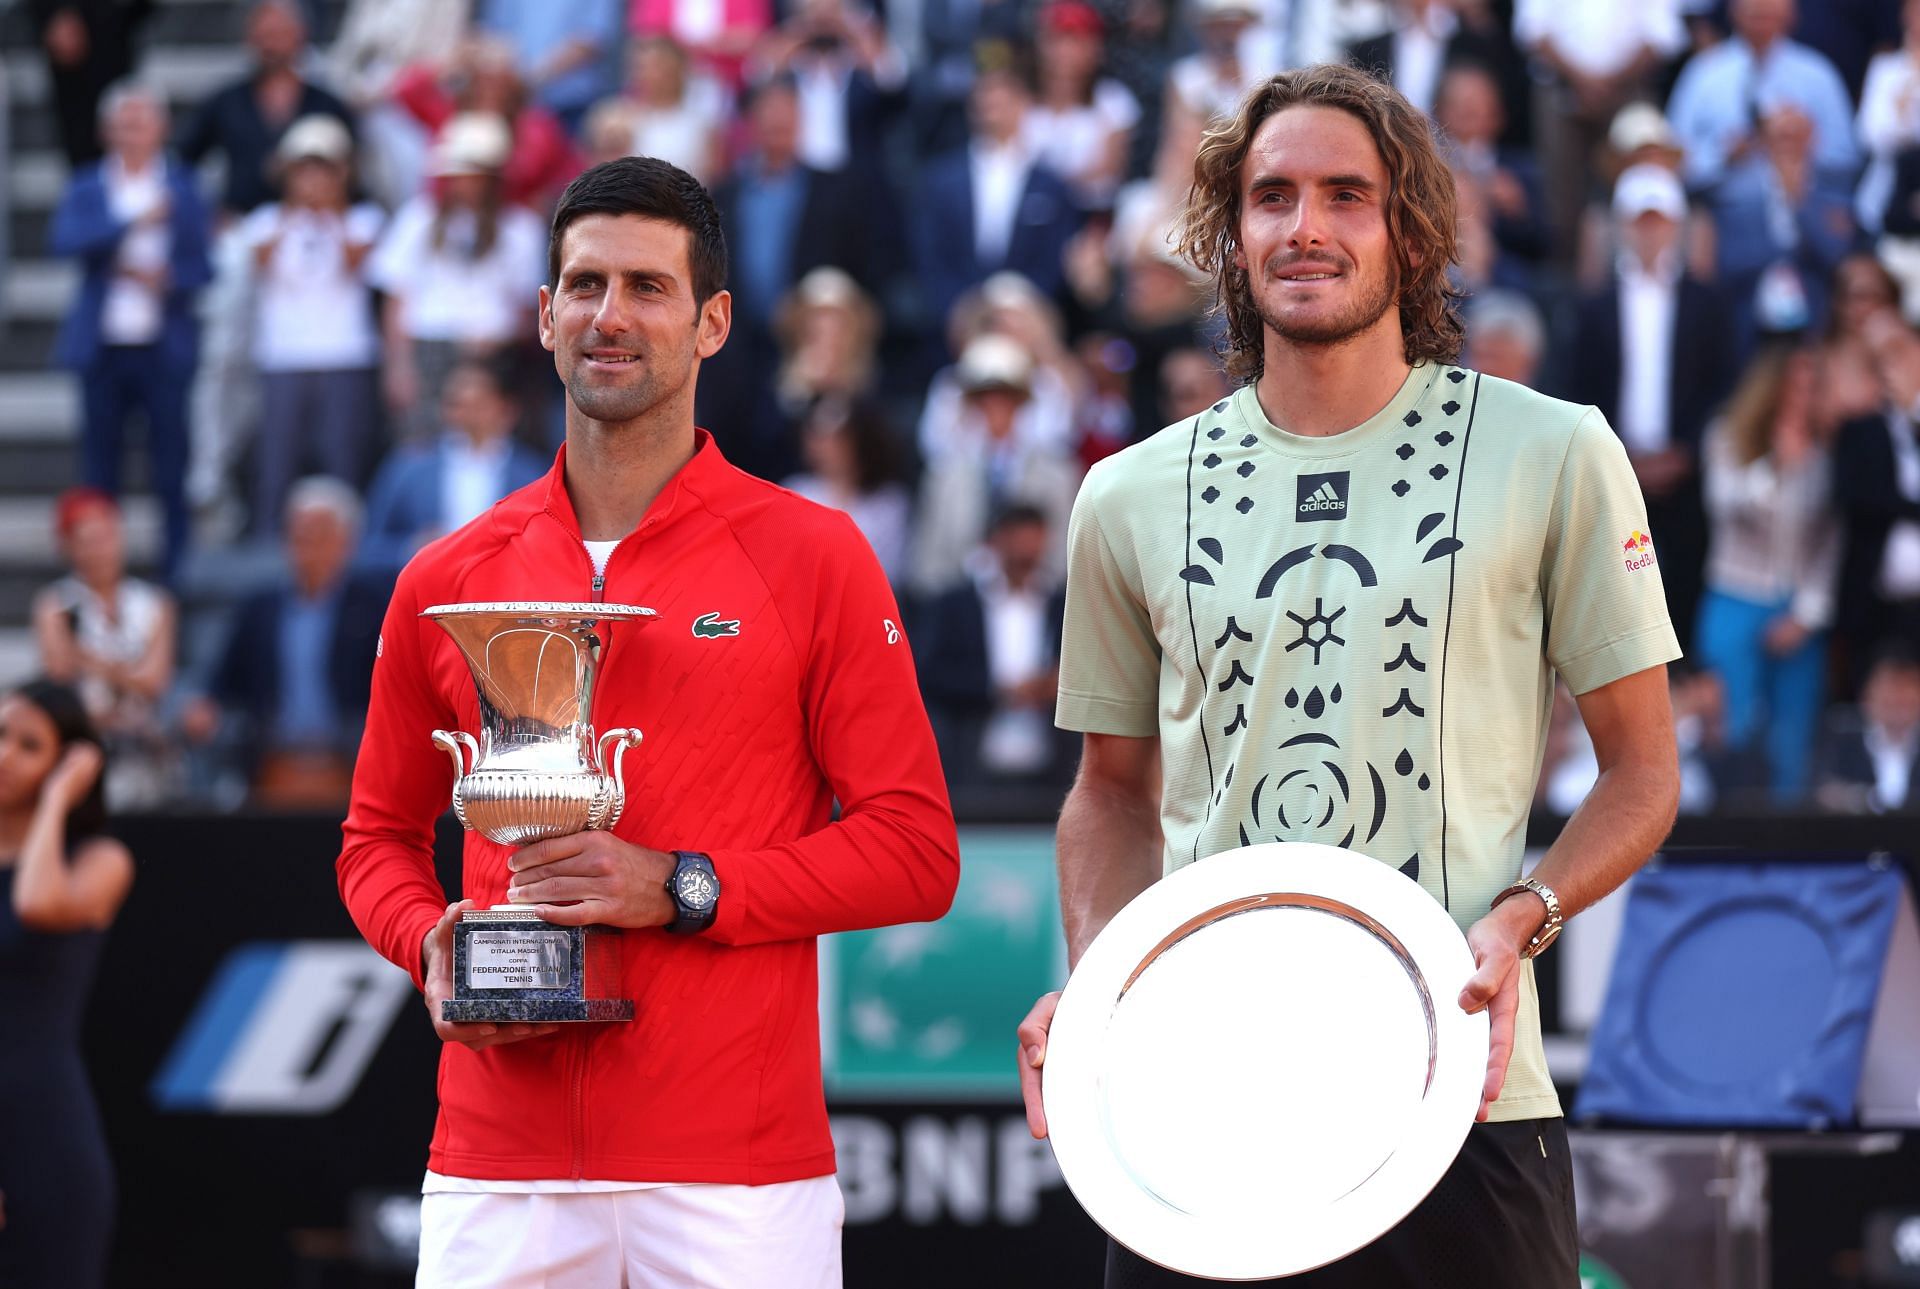 Novak Djokovic vs Stefanos Tsitsipas Where to watch, TV schedule, live streaming details and more 2022 Paris Masters